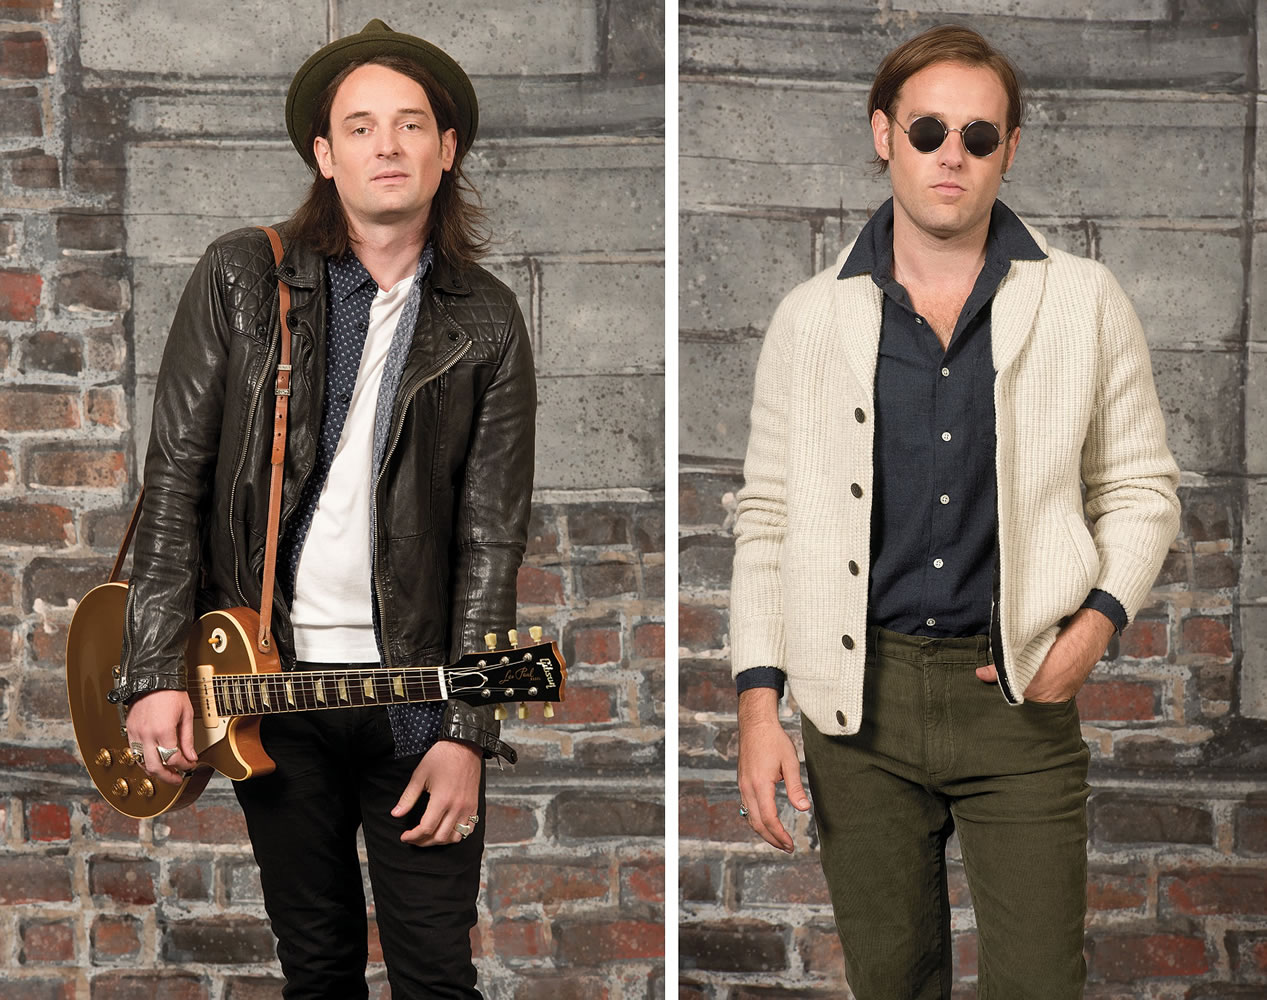 Paul Thornley, left, guitar player for U.S. Royalty, rocks the rocker role in a Conroy leather biker jacket, $650; worn over Crow Razor jeans, $160; Levant short-sleeved shirt, $140; and Tonic crew T-shirt, $50. His topper is a Hackman fedora. Right, his brother John Thornley (vocals) is laid-back in a brushed cotton navy shirt, $255, under a Jameson shawl wool cardigan, $450; with five-pocket corduroy pants, $69. Illustrates FASHION-MEN (category l), by Janet Kelly, special to The Washington Post. Moved Tuesday, Oct. 14, 2014.